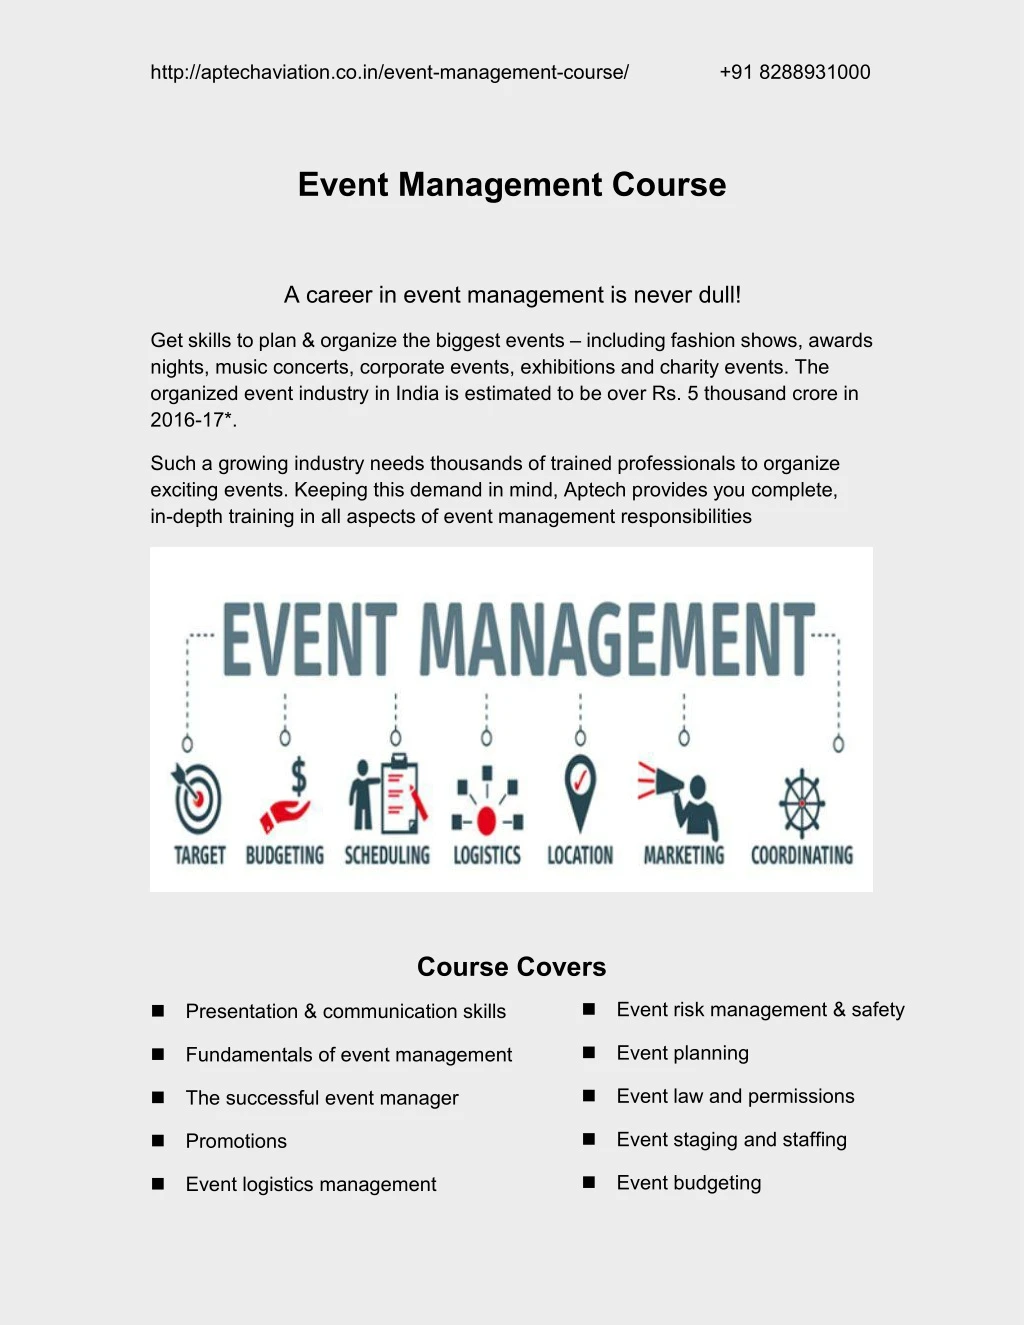 http aptechaviation co in event management course